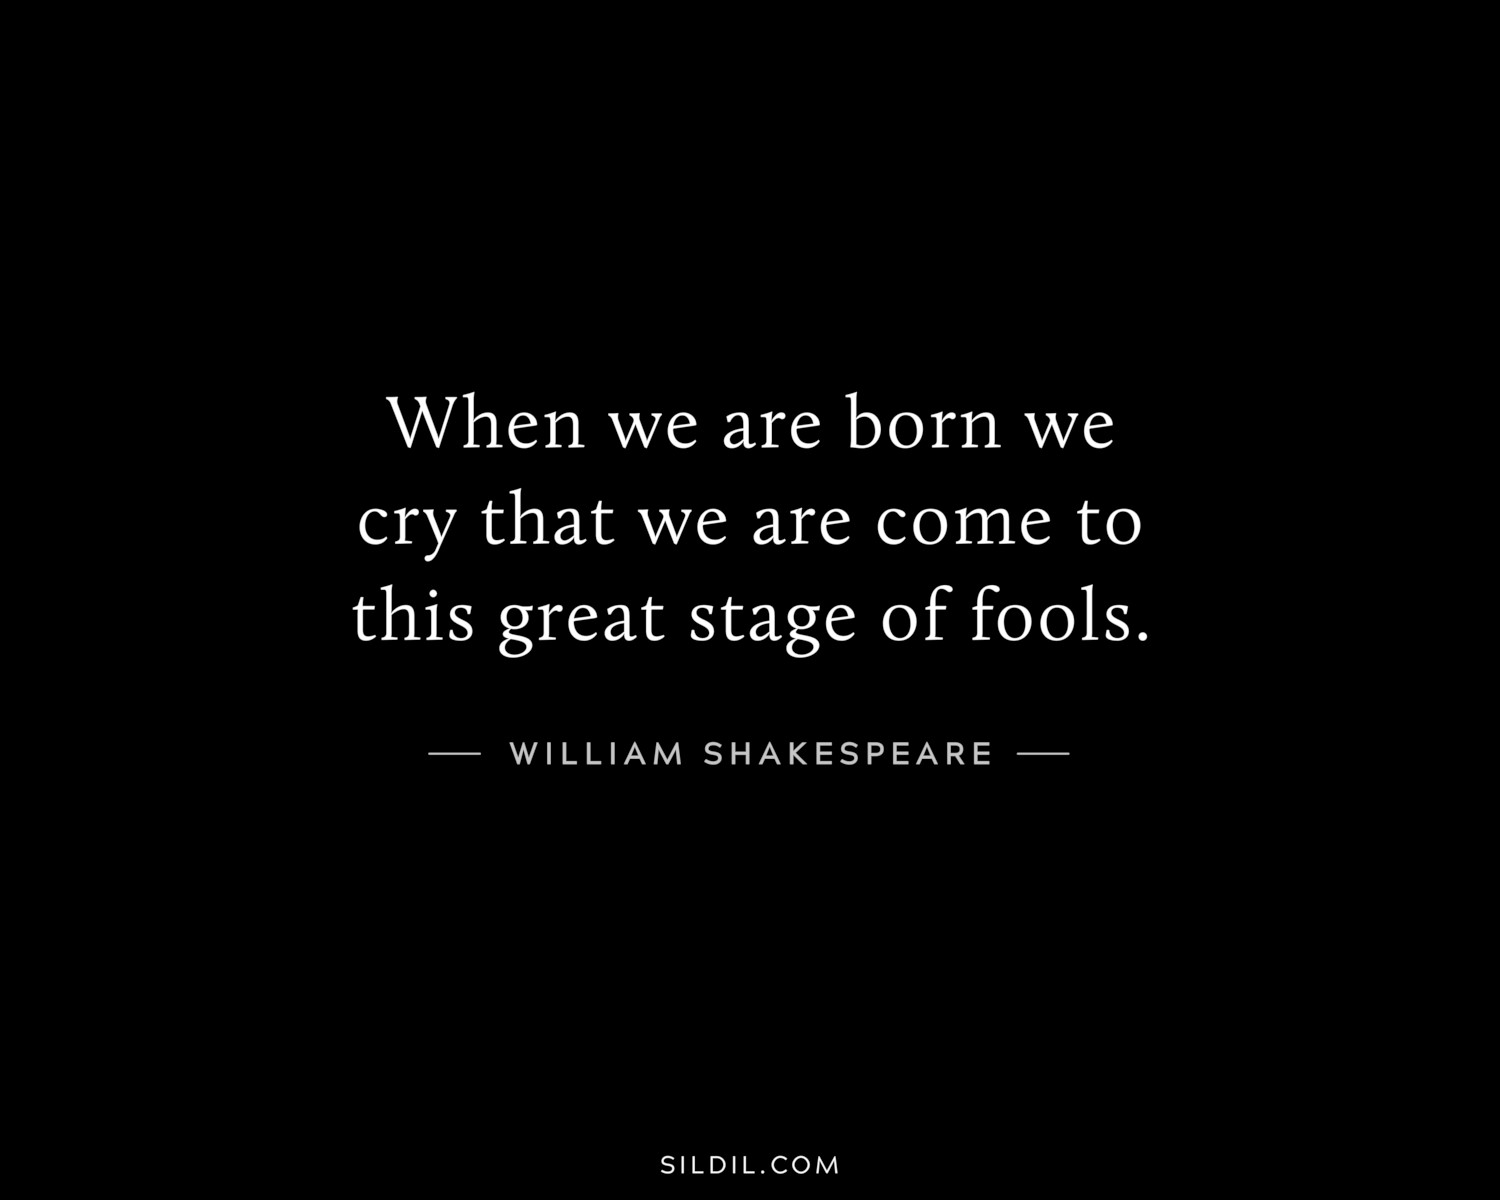 When we are born we cry that we are come to this great stage of fools.